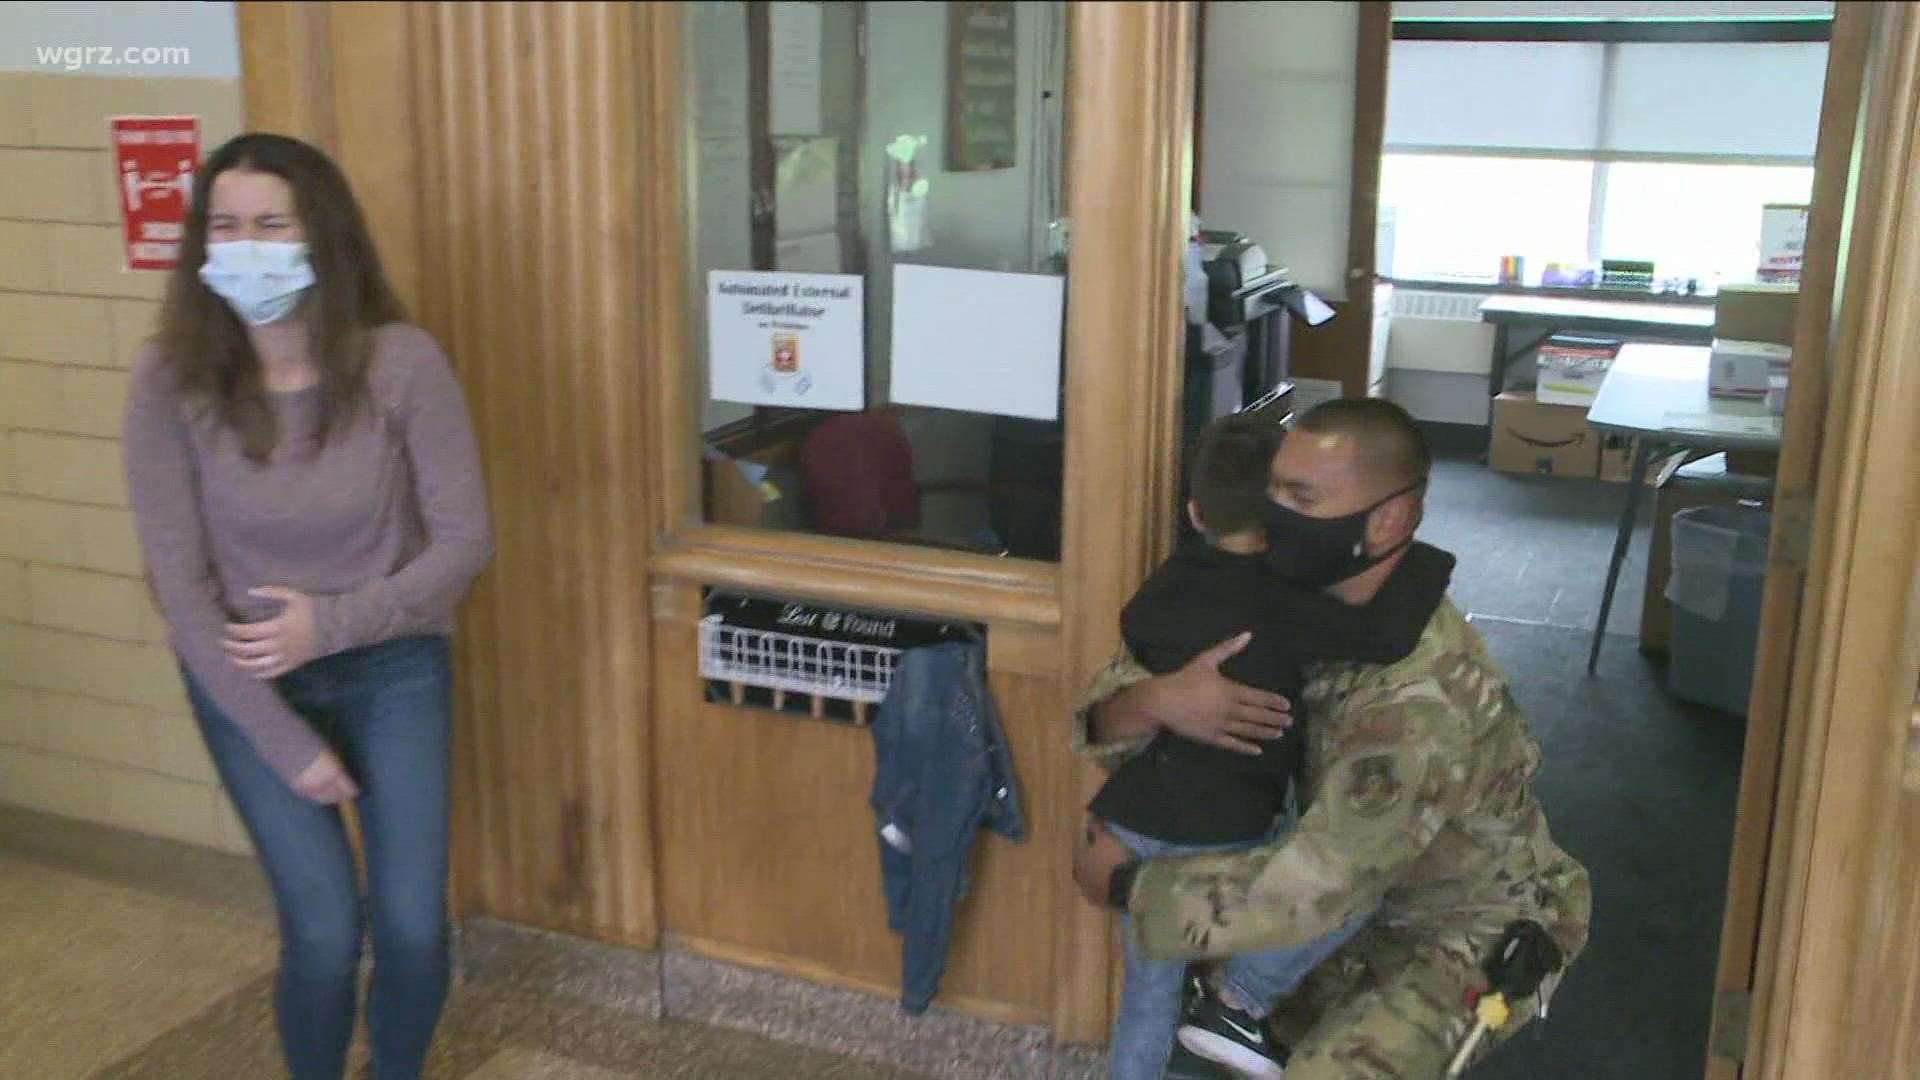 Air force father surprises son at school